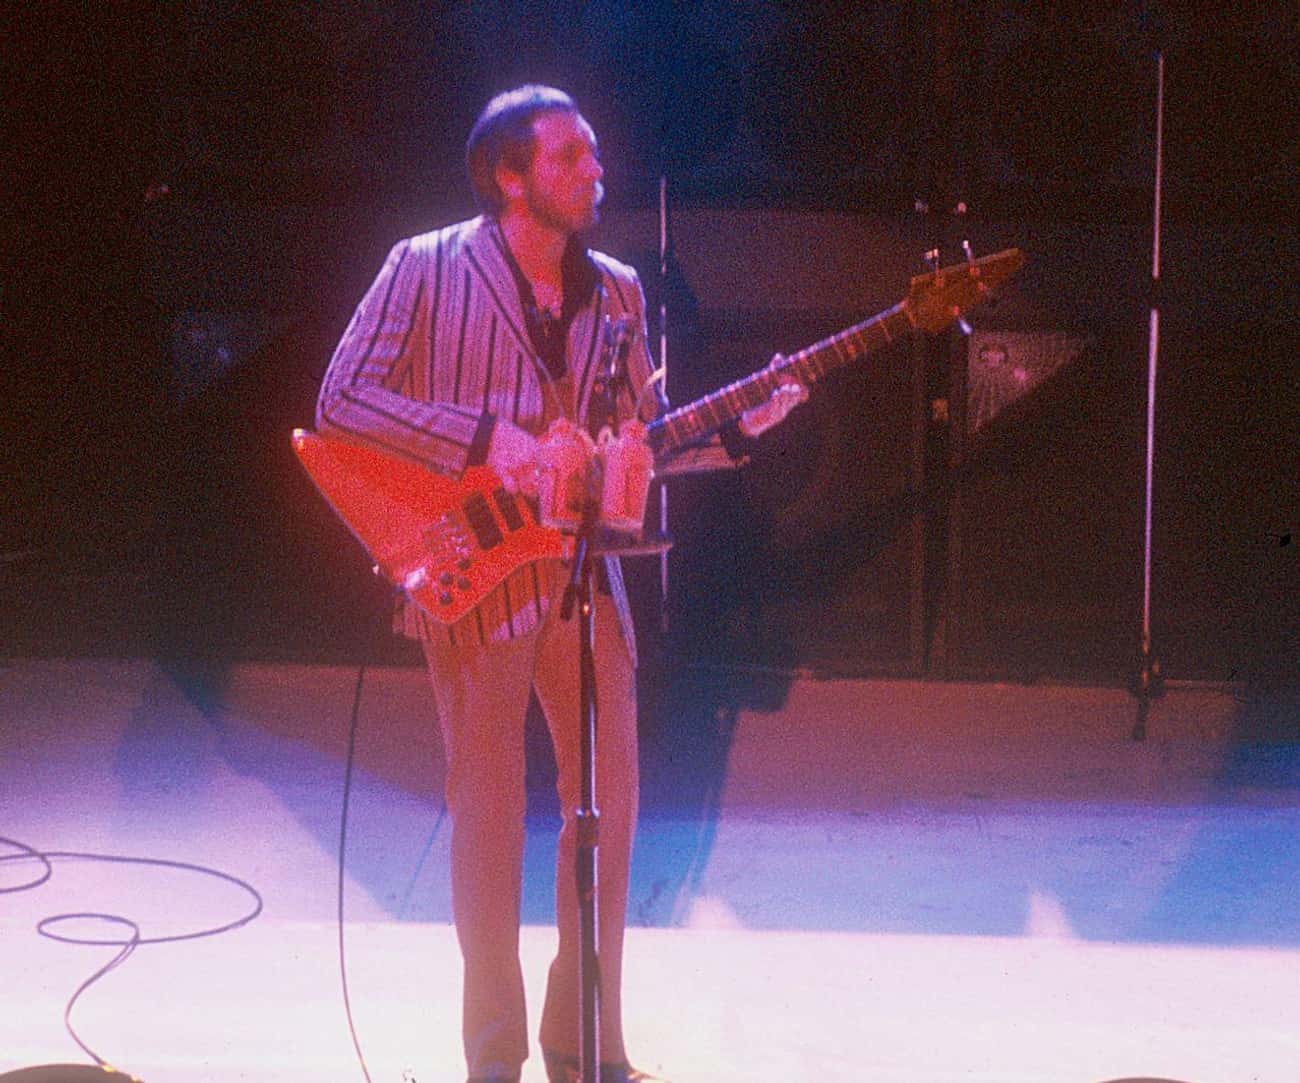 John Entwistle, The Only Member Of The Who With Formal Musical Training, Also Arranged For The Band 